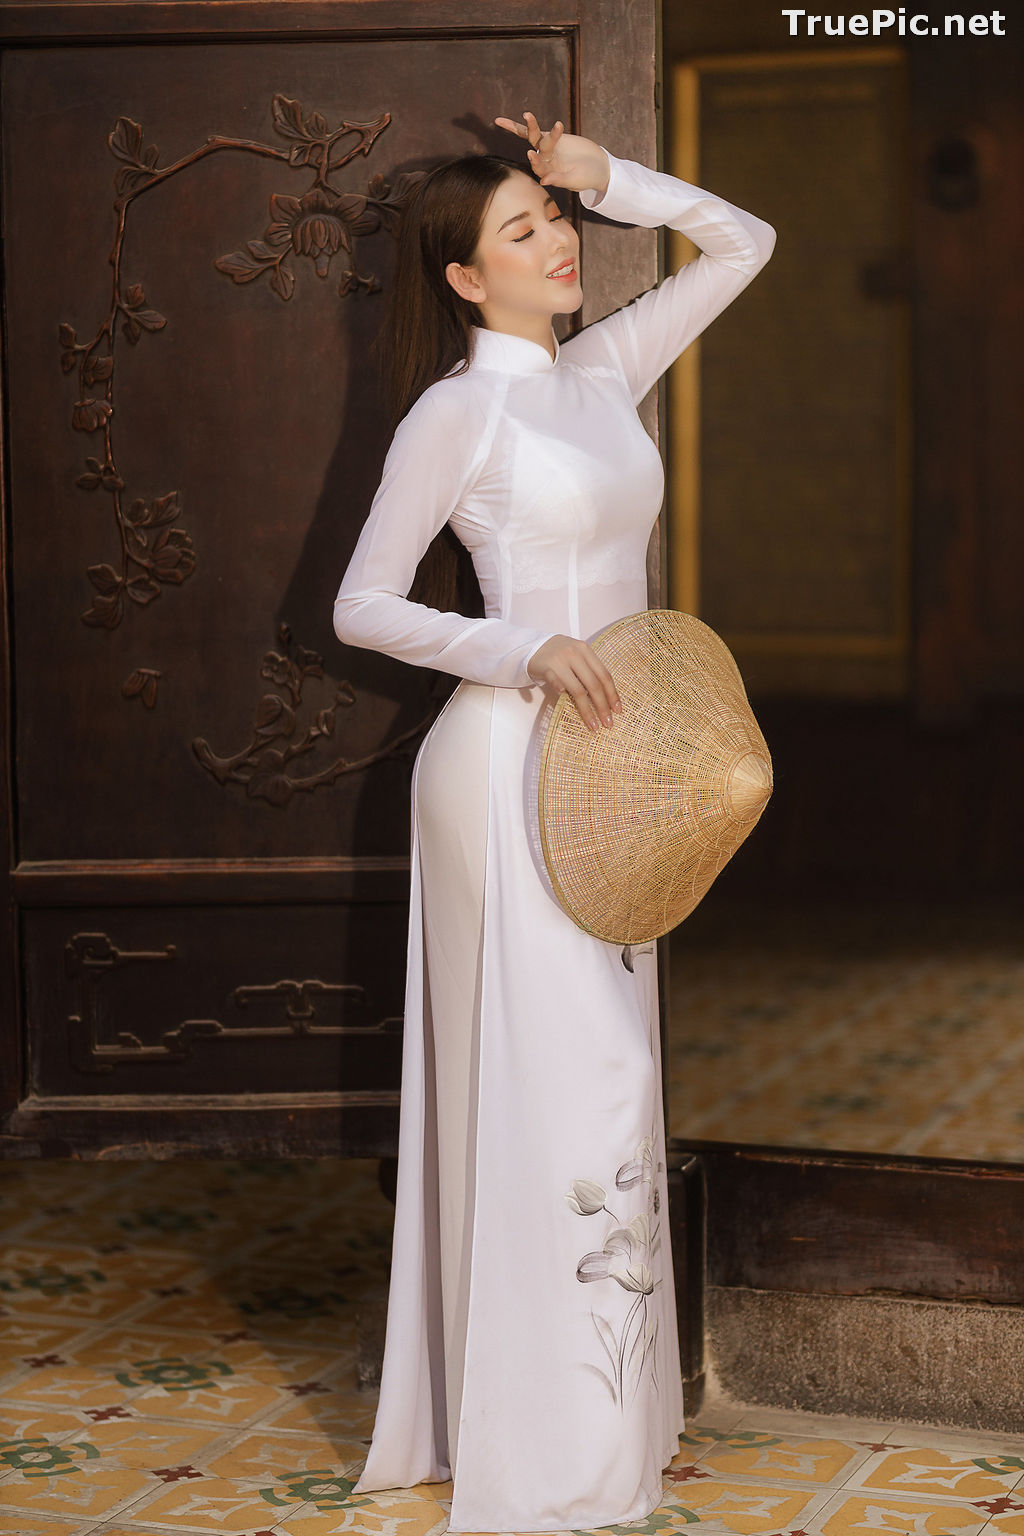 Image The Beauty of Vietnamese Girls with Traditional Dress (Ao Dai) #2 - TruePic.net - Picture-73